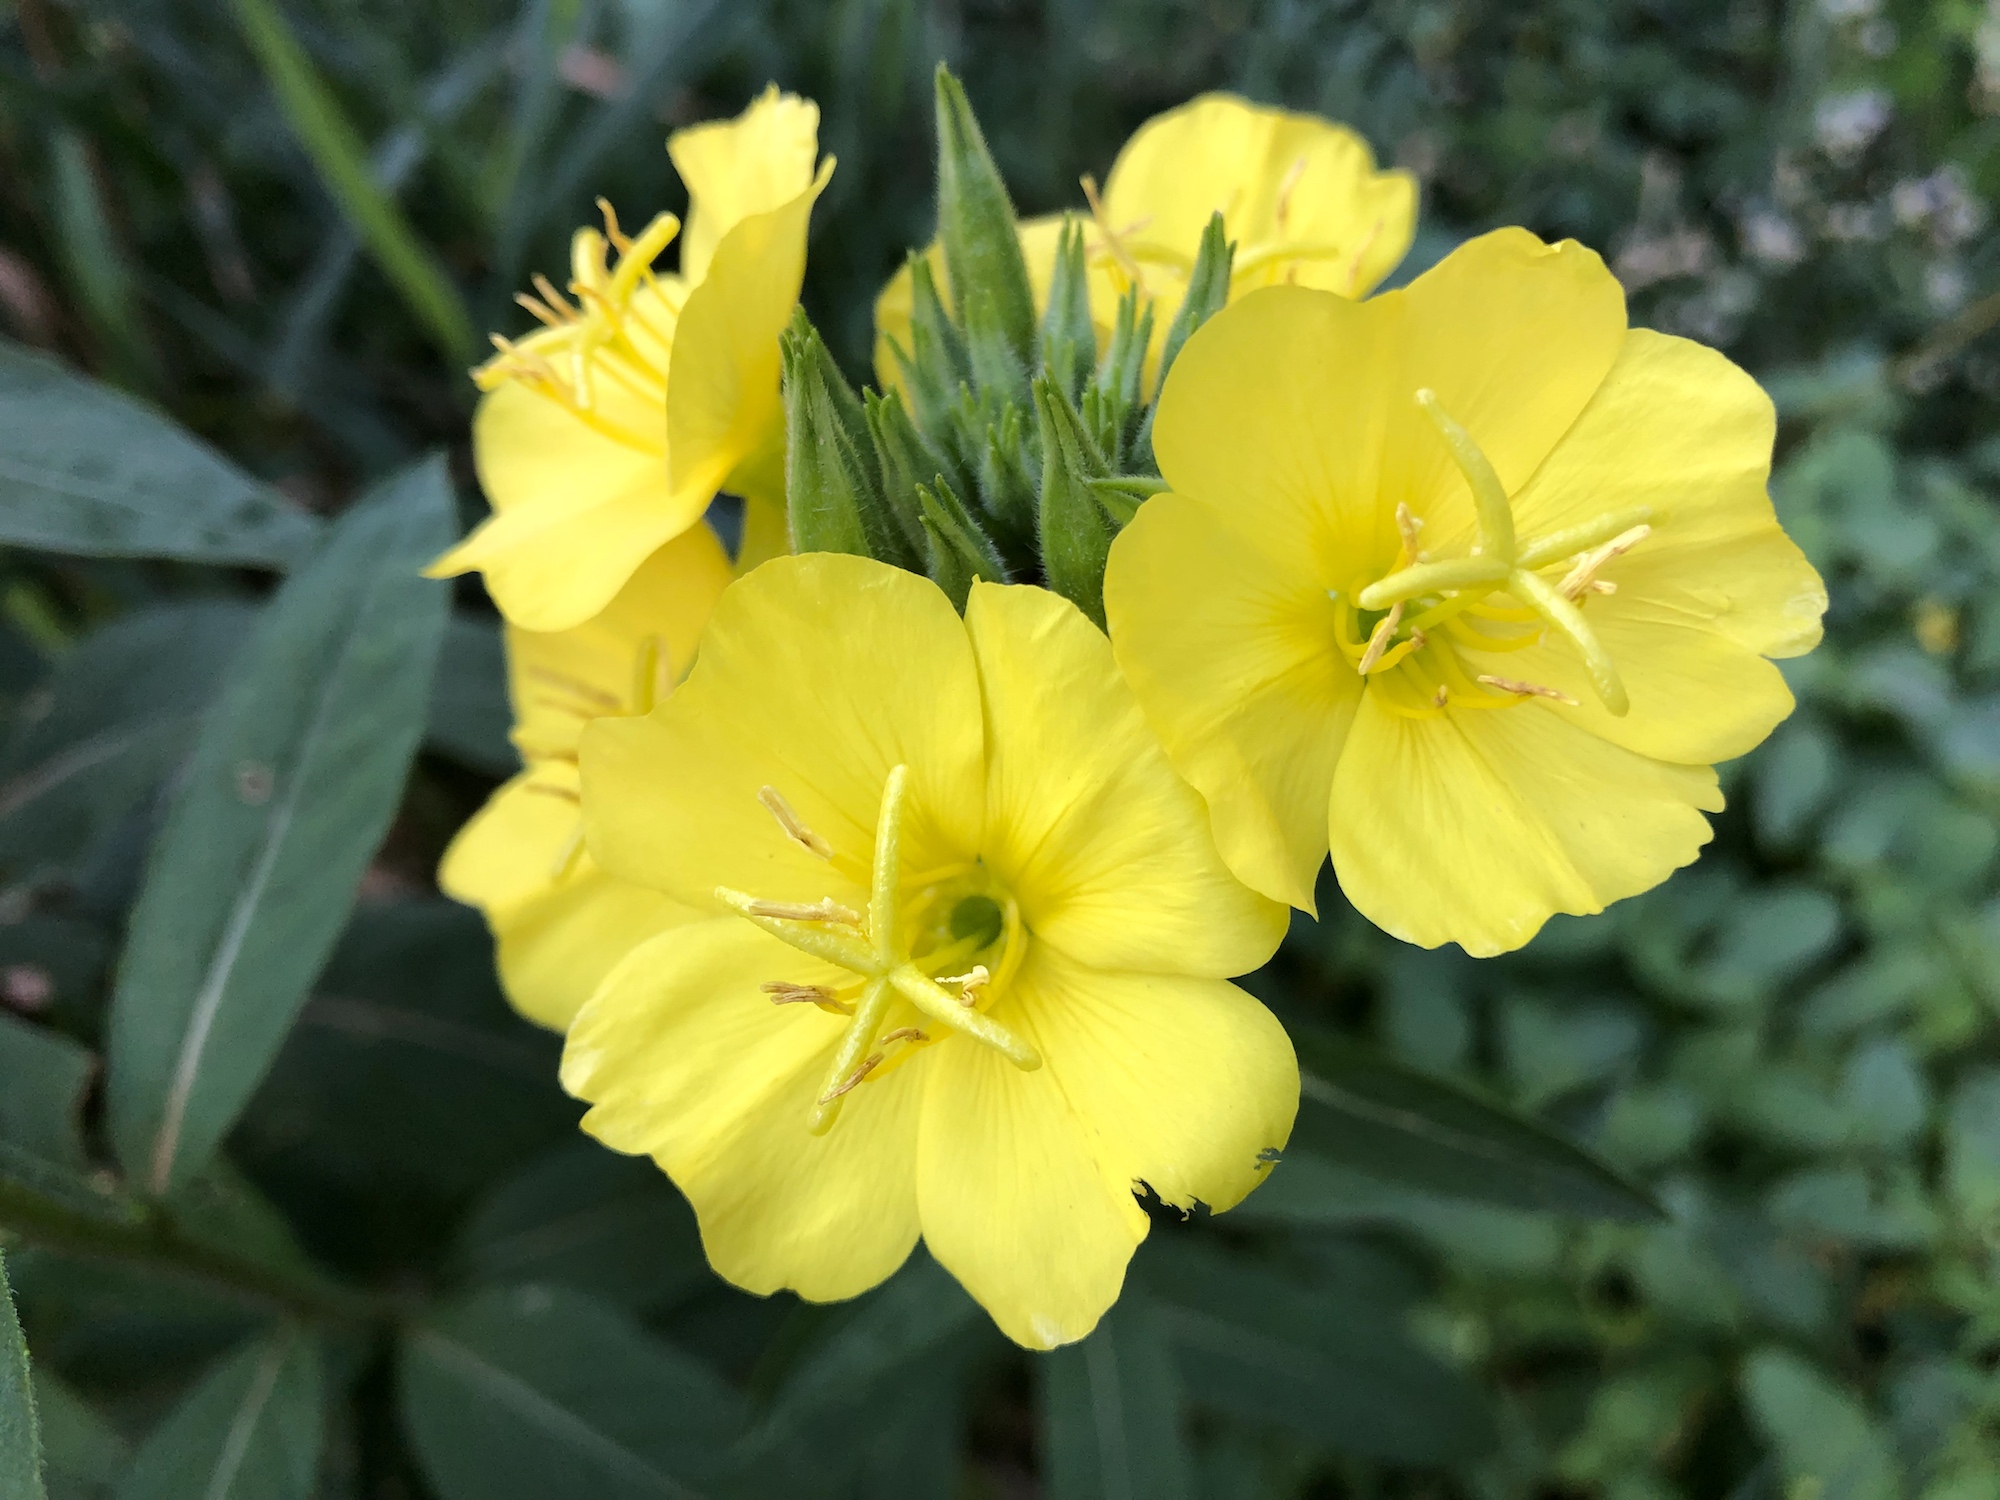 Evening Primrose on shore of Marion Dunn Pond on August 22, 2019.